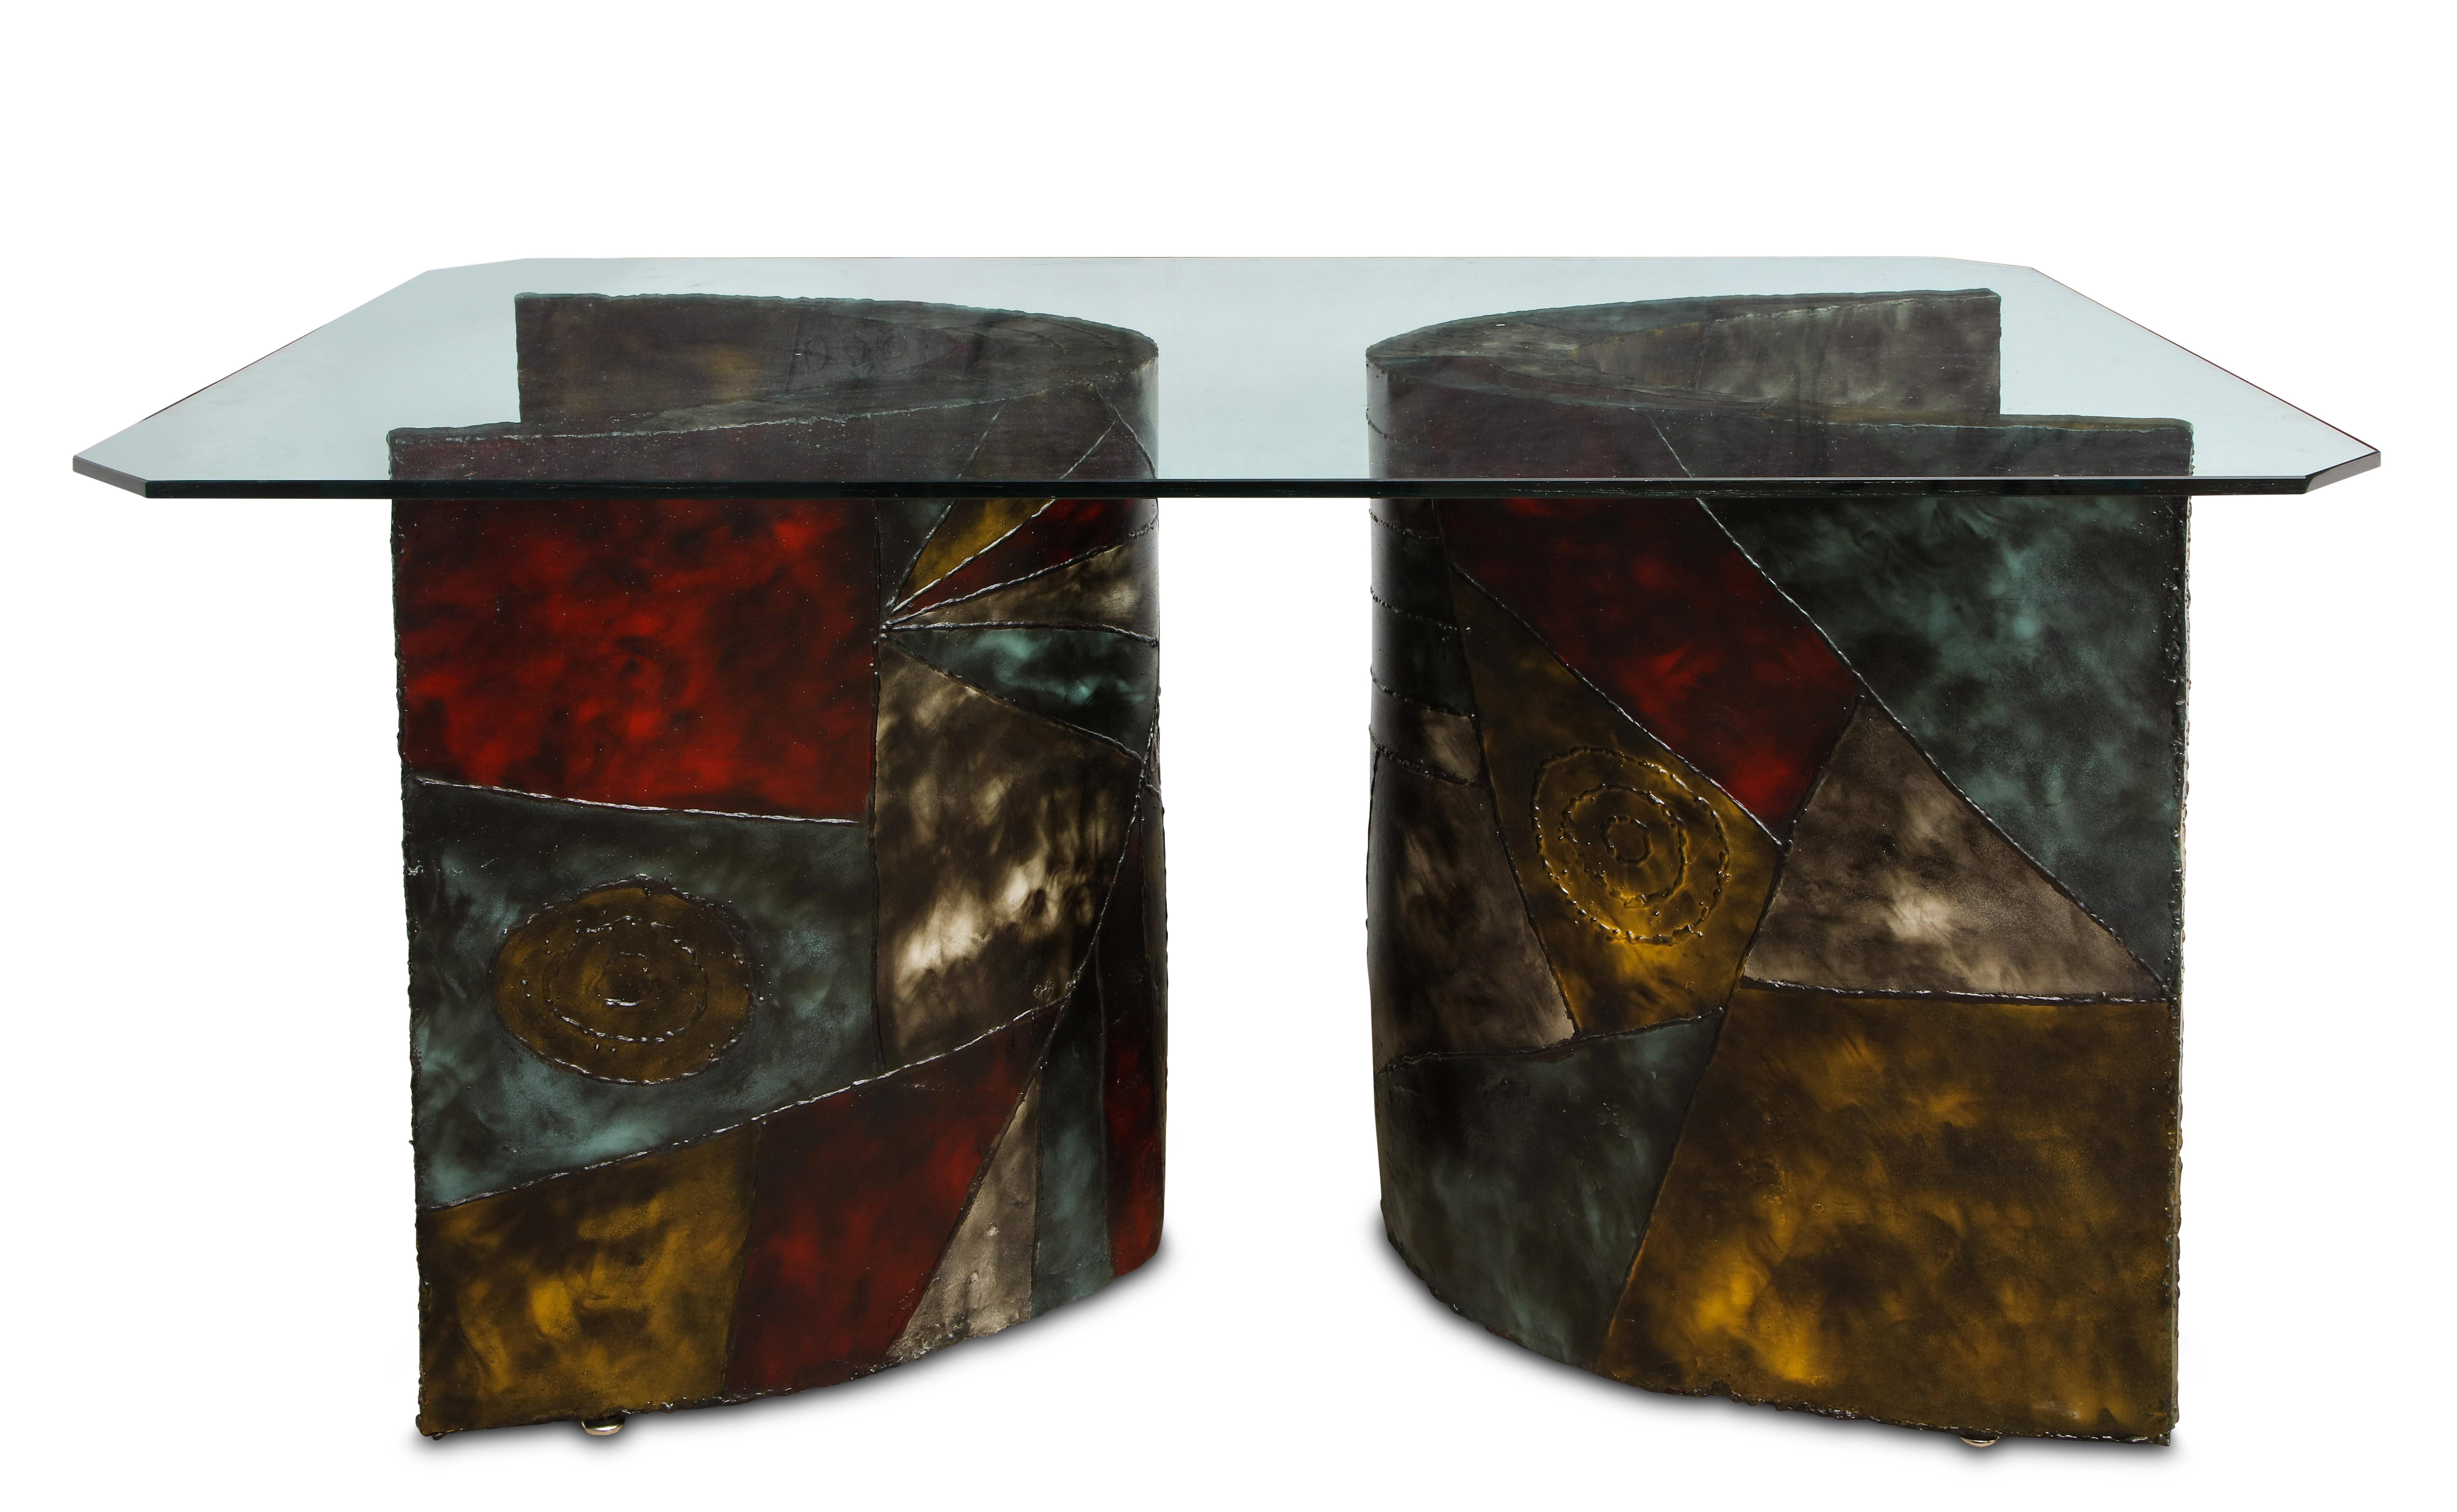 North American Sculpted steel patchwork double base dining table, Model PE 24 by Paul Evans